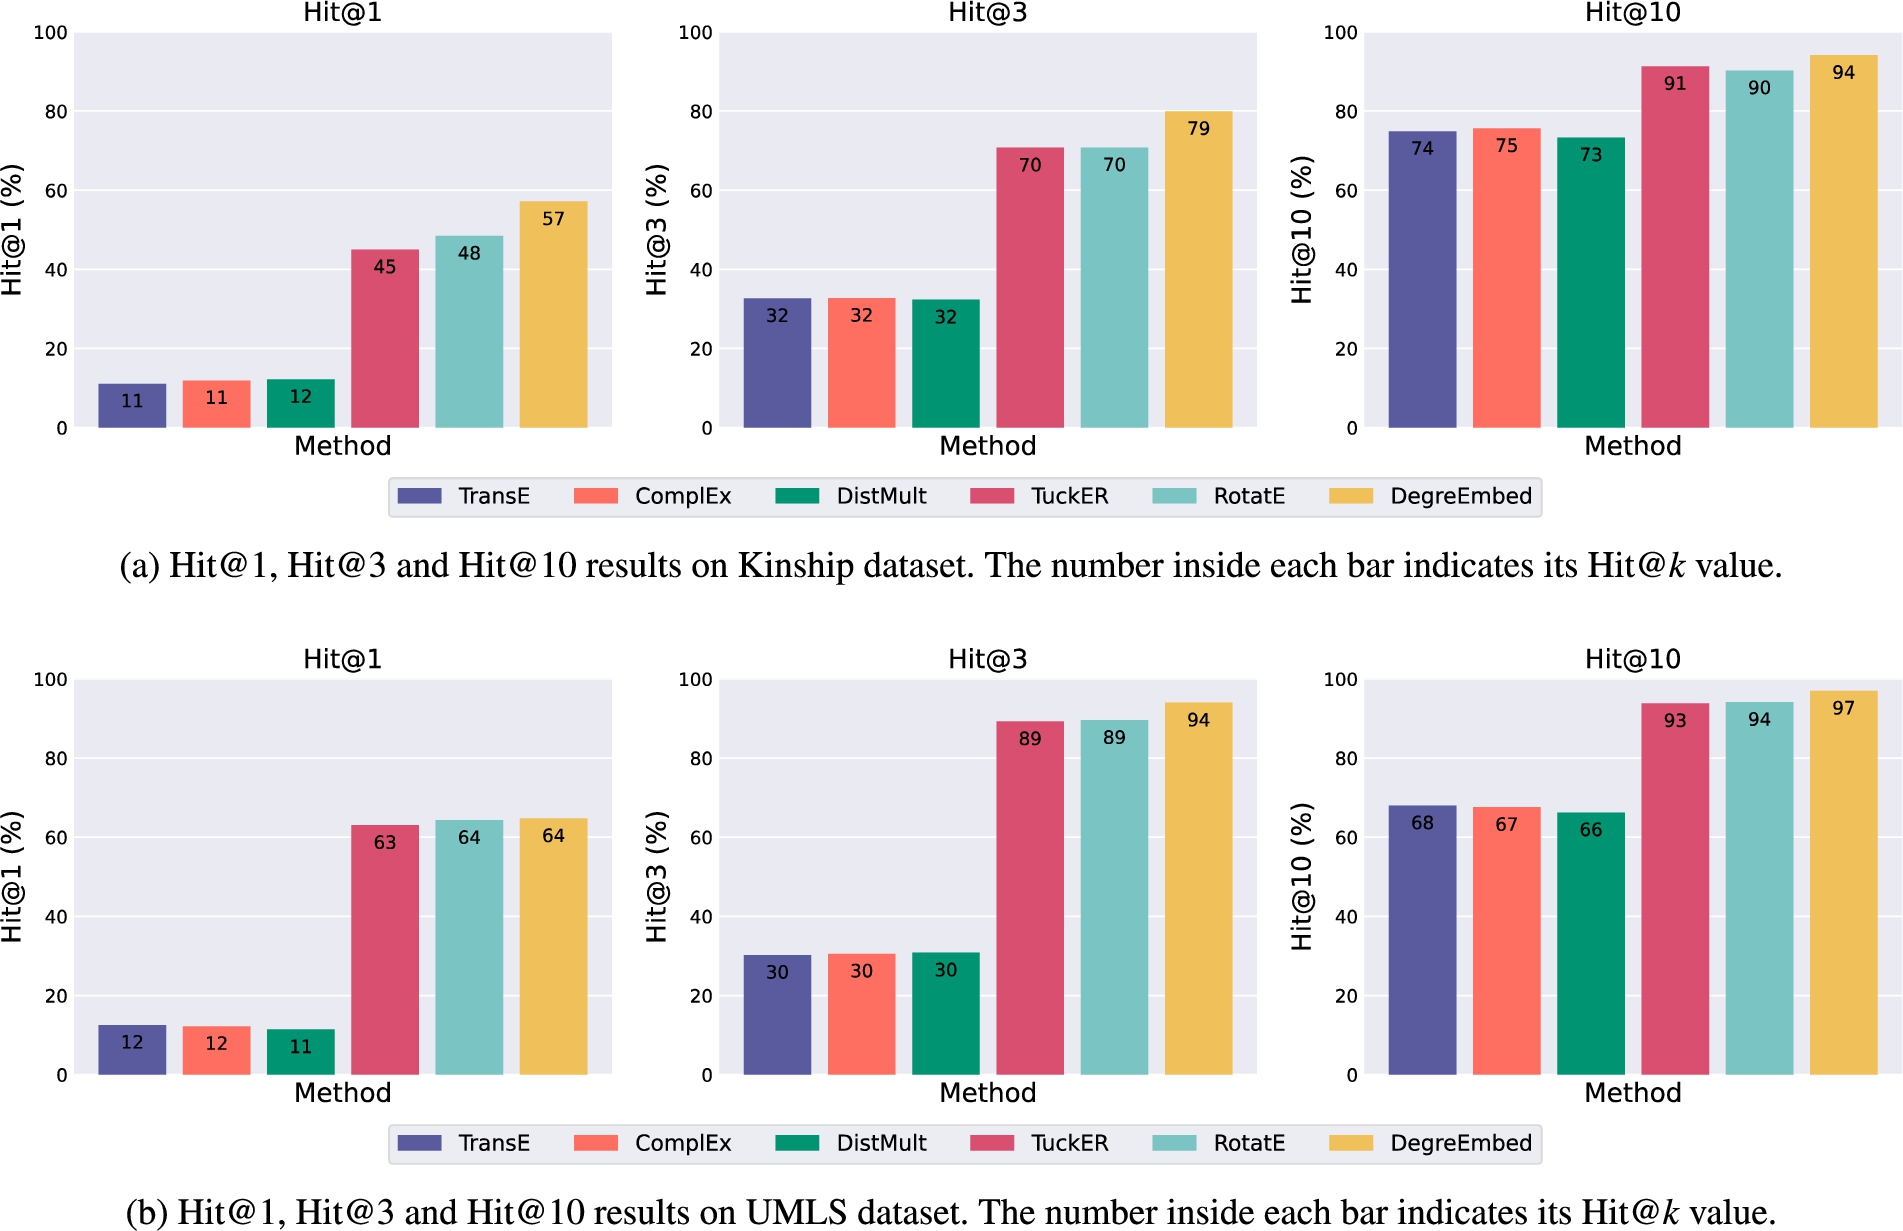 Model performance on Kinship and UMLS with the original entity embeddings replaced by pre-trained ones from embedding-based methods. Hit@k is in %.